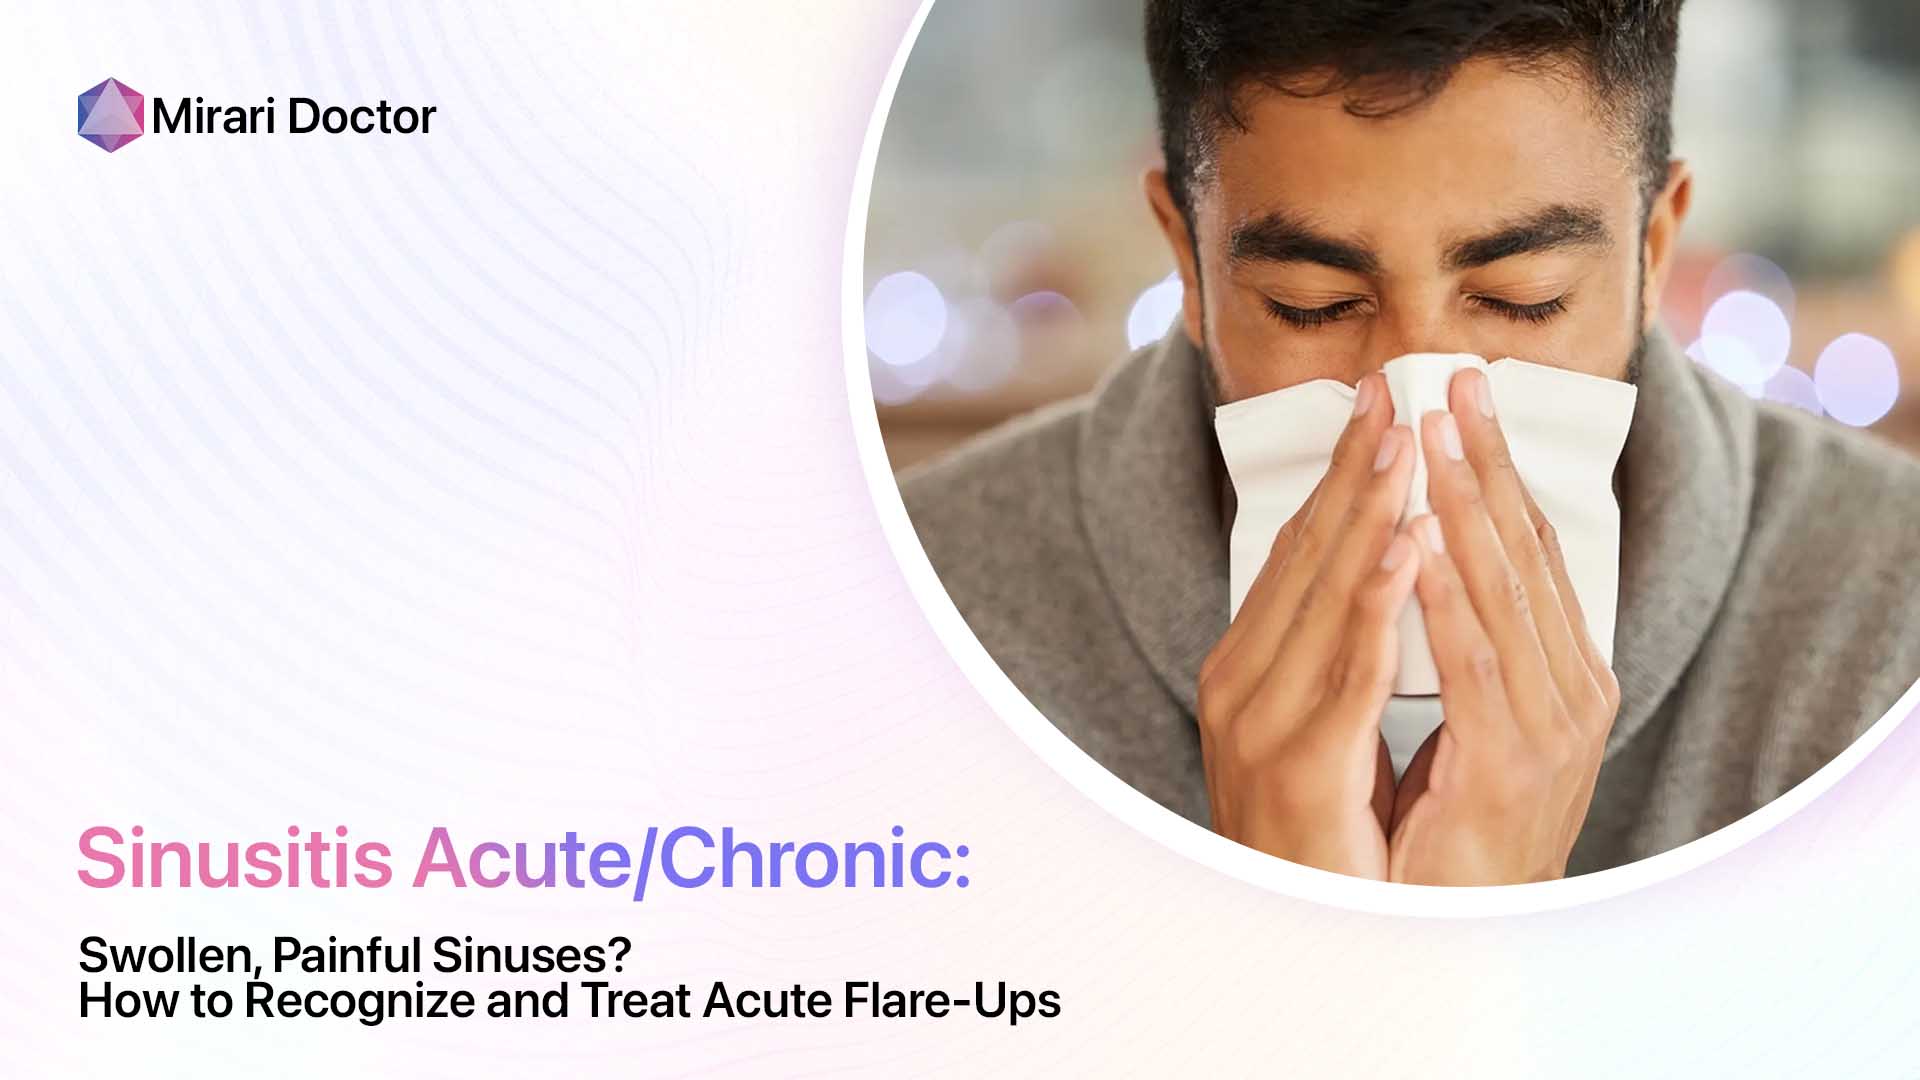 Swollen, Painful Sinuses? How to Recognize and Treat Acute Flare-Ups